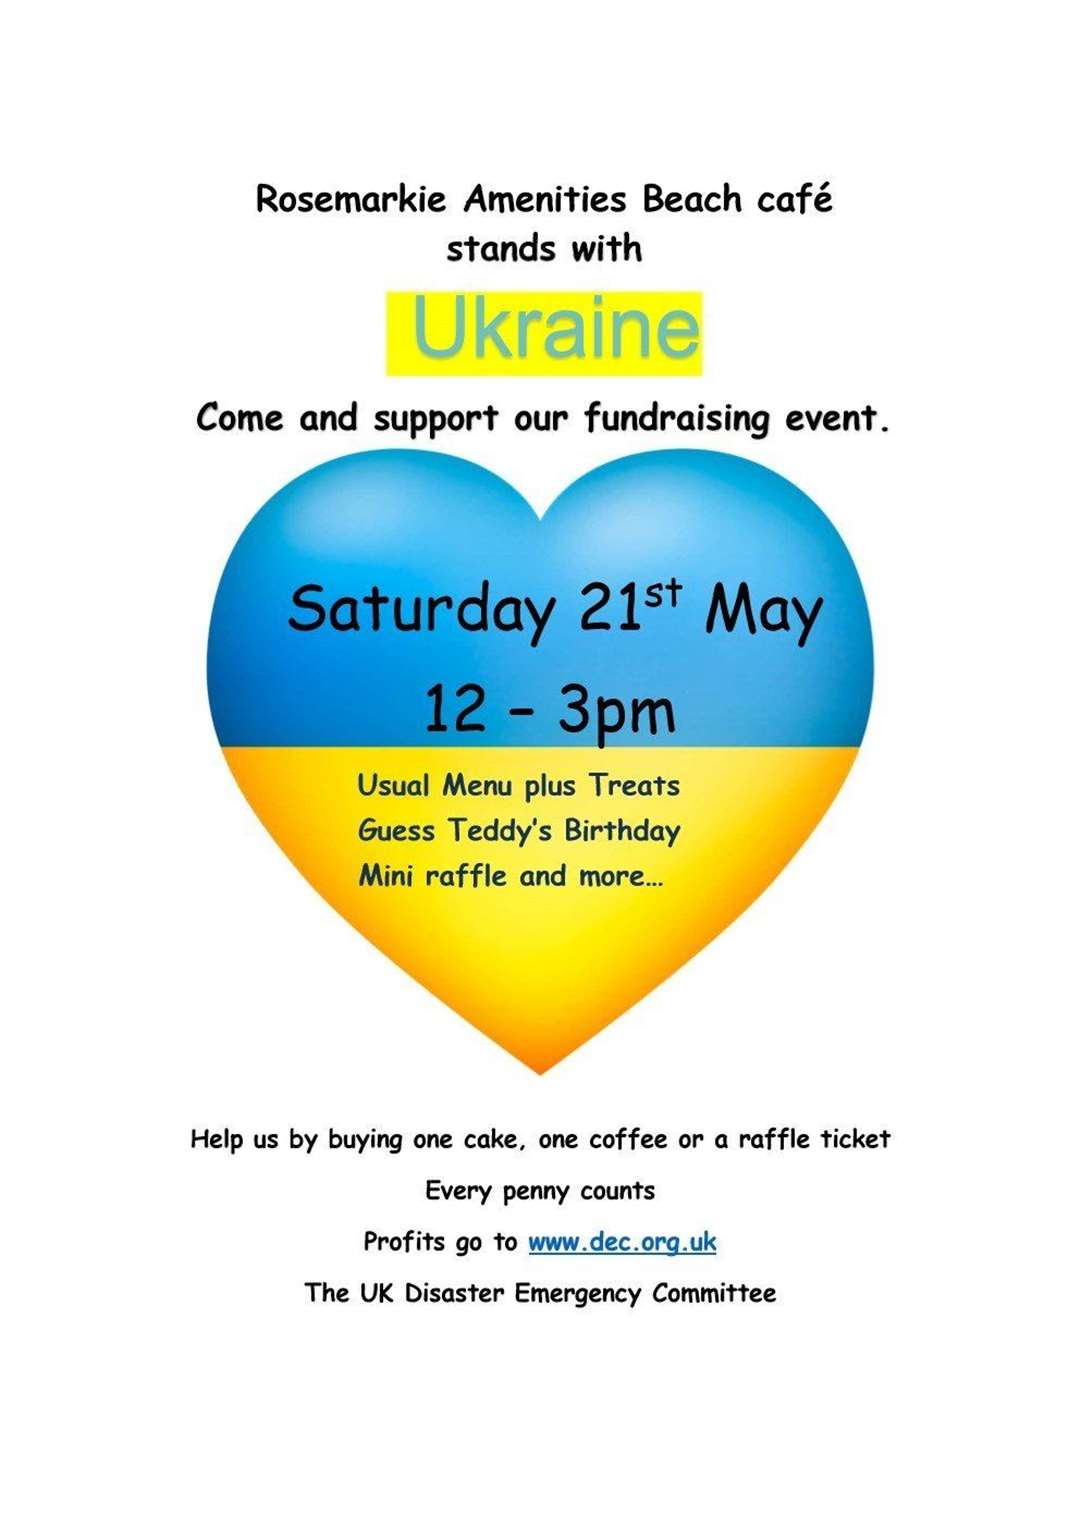 The fundraiser at the Rosemarkie Amenities Beach cafe takes place today from noon to 3pm.